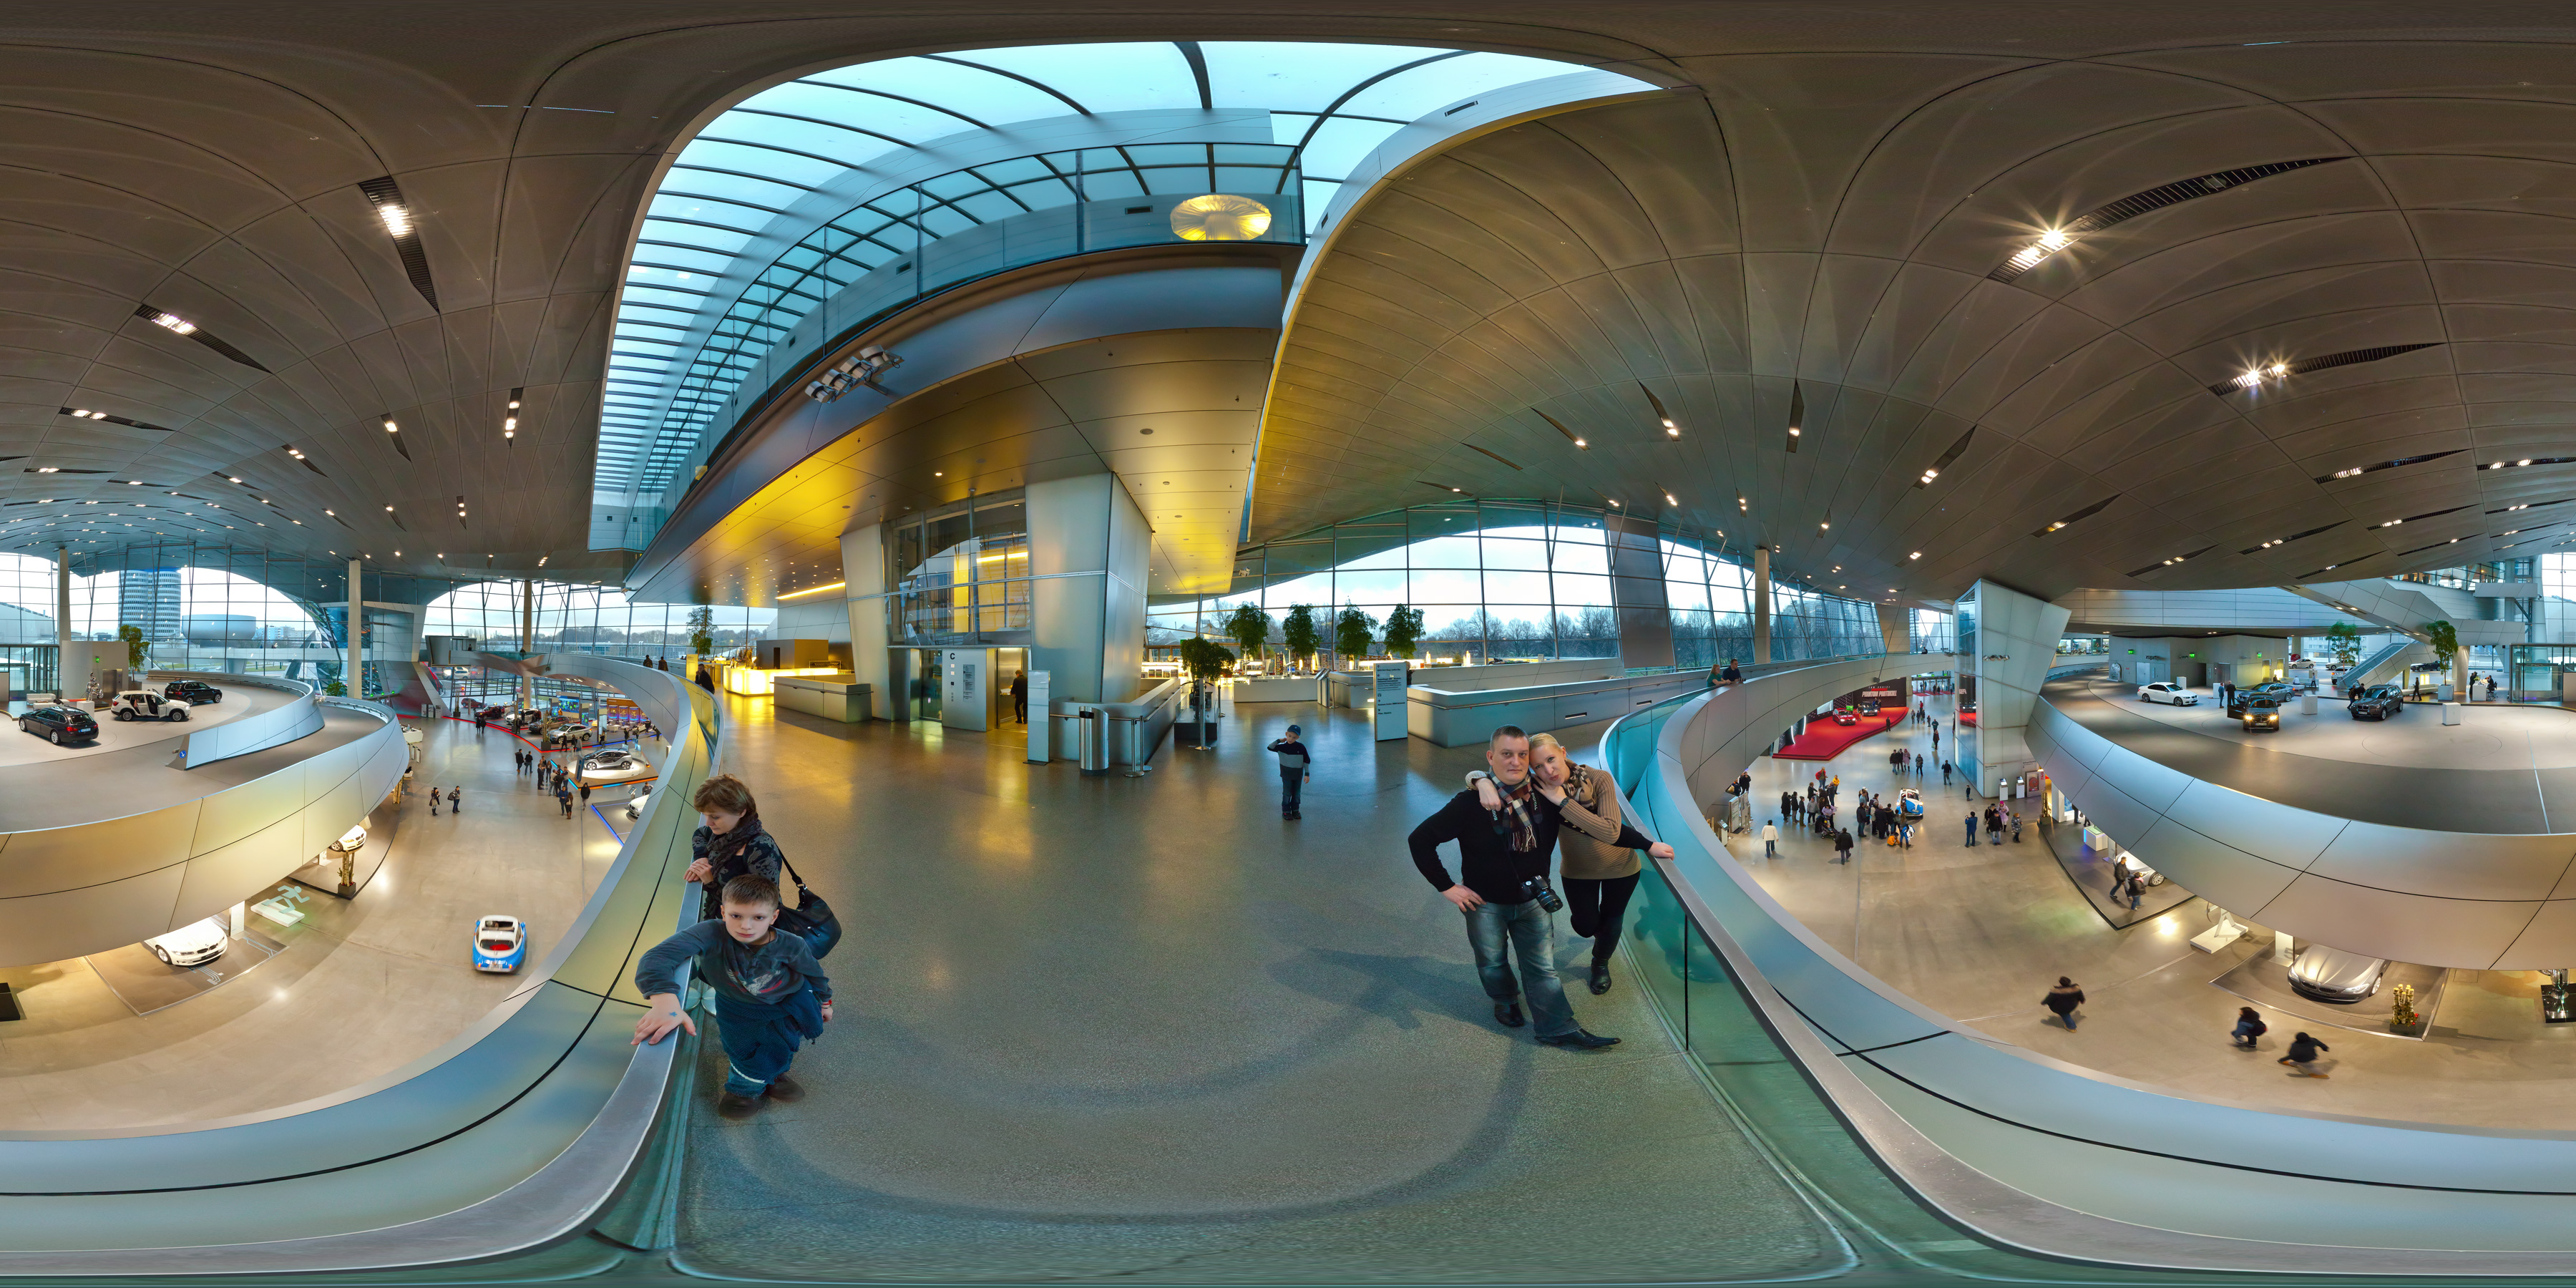 BMW World - Interactive 360º VR panoramas by Andrew Bodrov